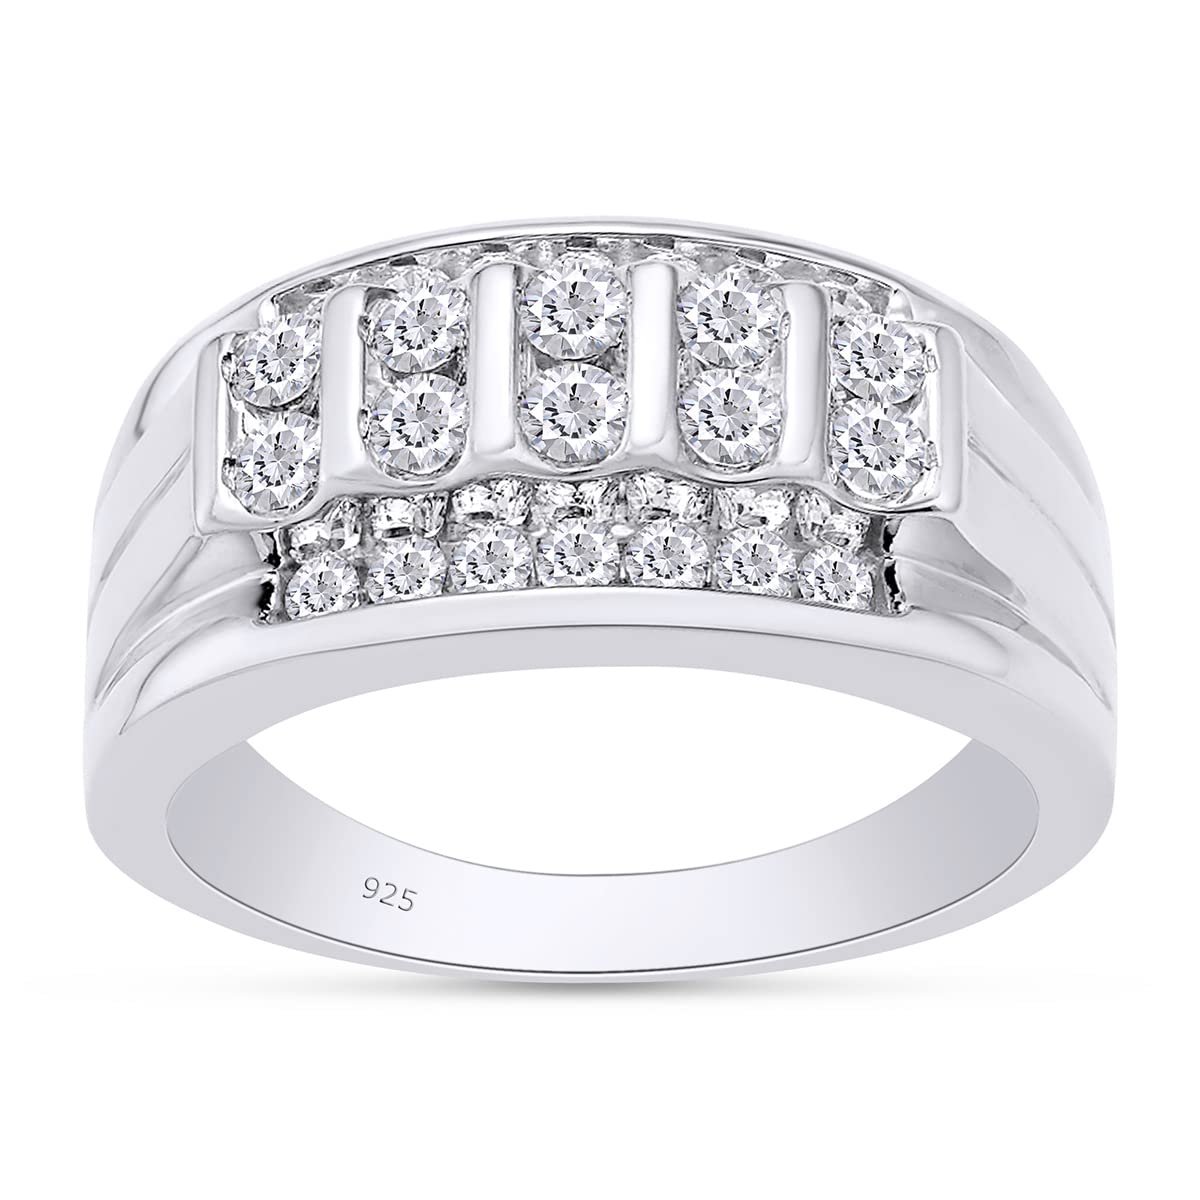 1 Carat Lab Created Moissanite Diamond Cluster Men's Wedding Band Ring In 925 Sterling Silver